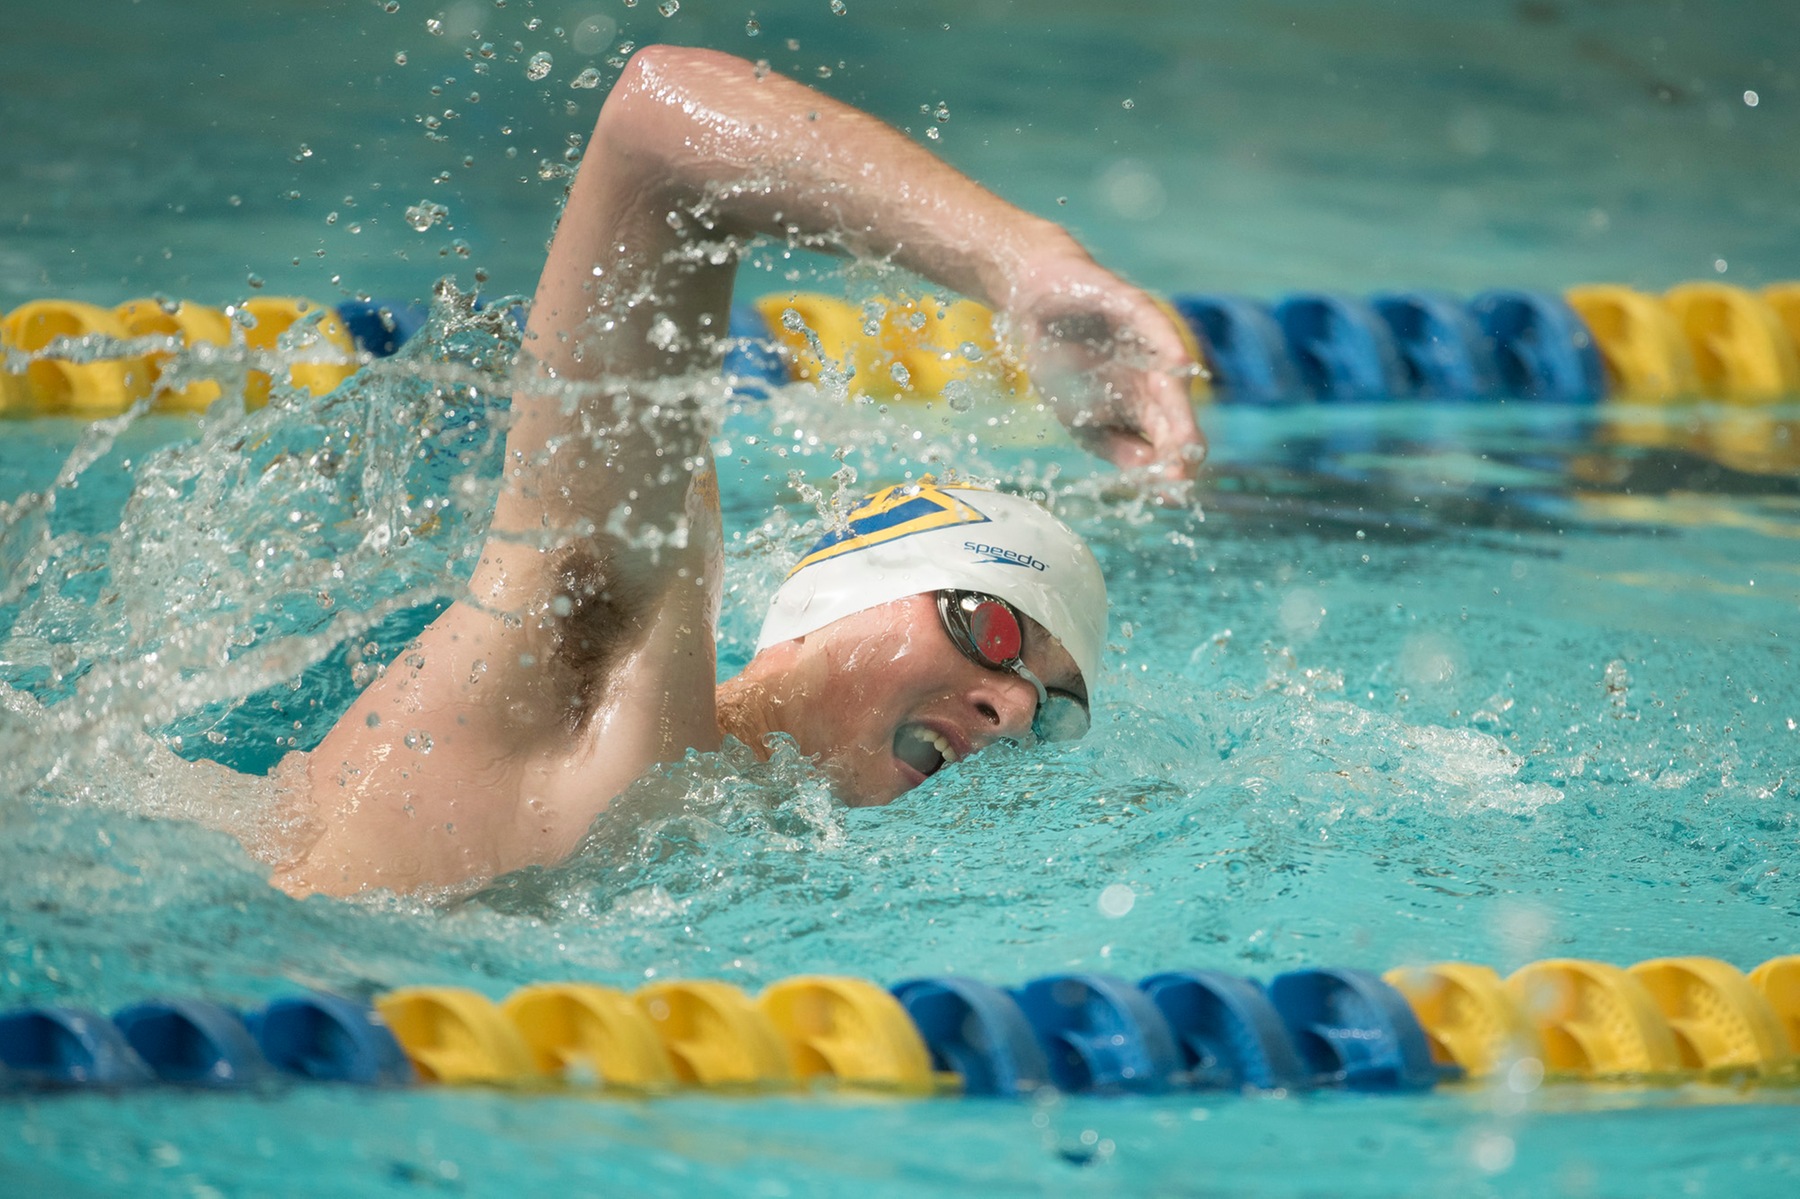 Blugolds in third after Day 1 of UWSP Invite